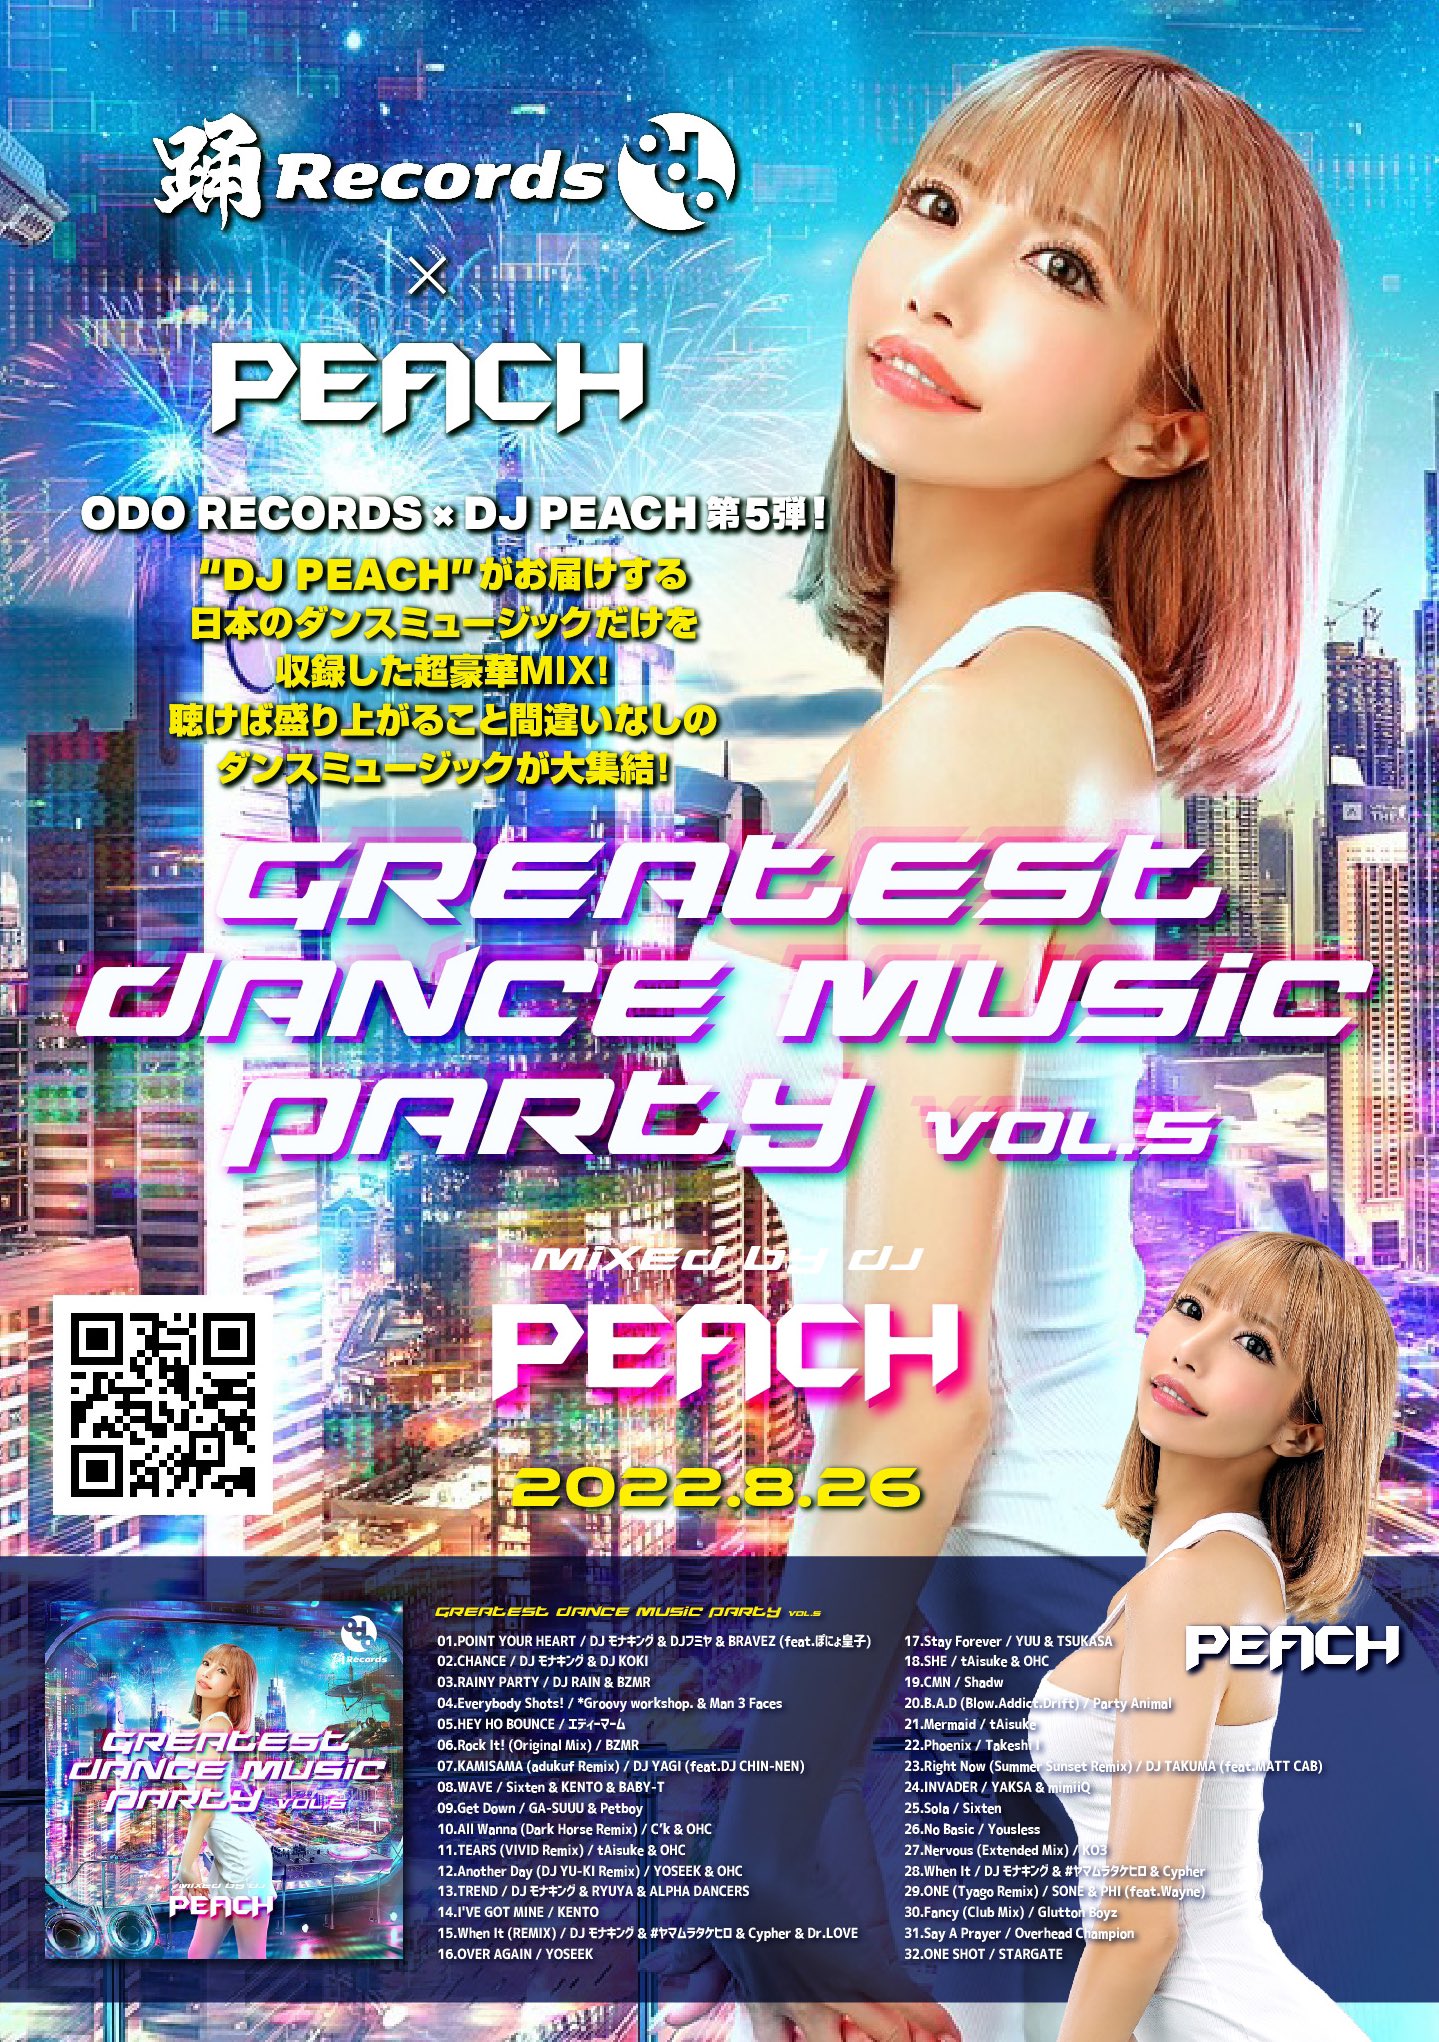 GREATEST DANCE MUSIC PARTY VOL.5 mixed by DJ PEACH  2022.8.26（FRI）RELEASE！！！